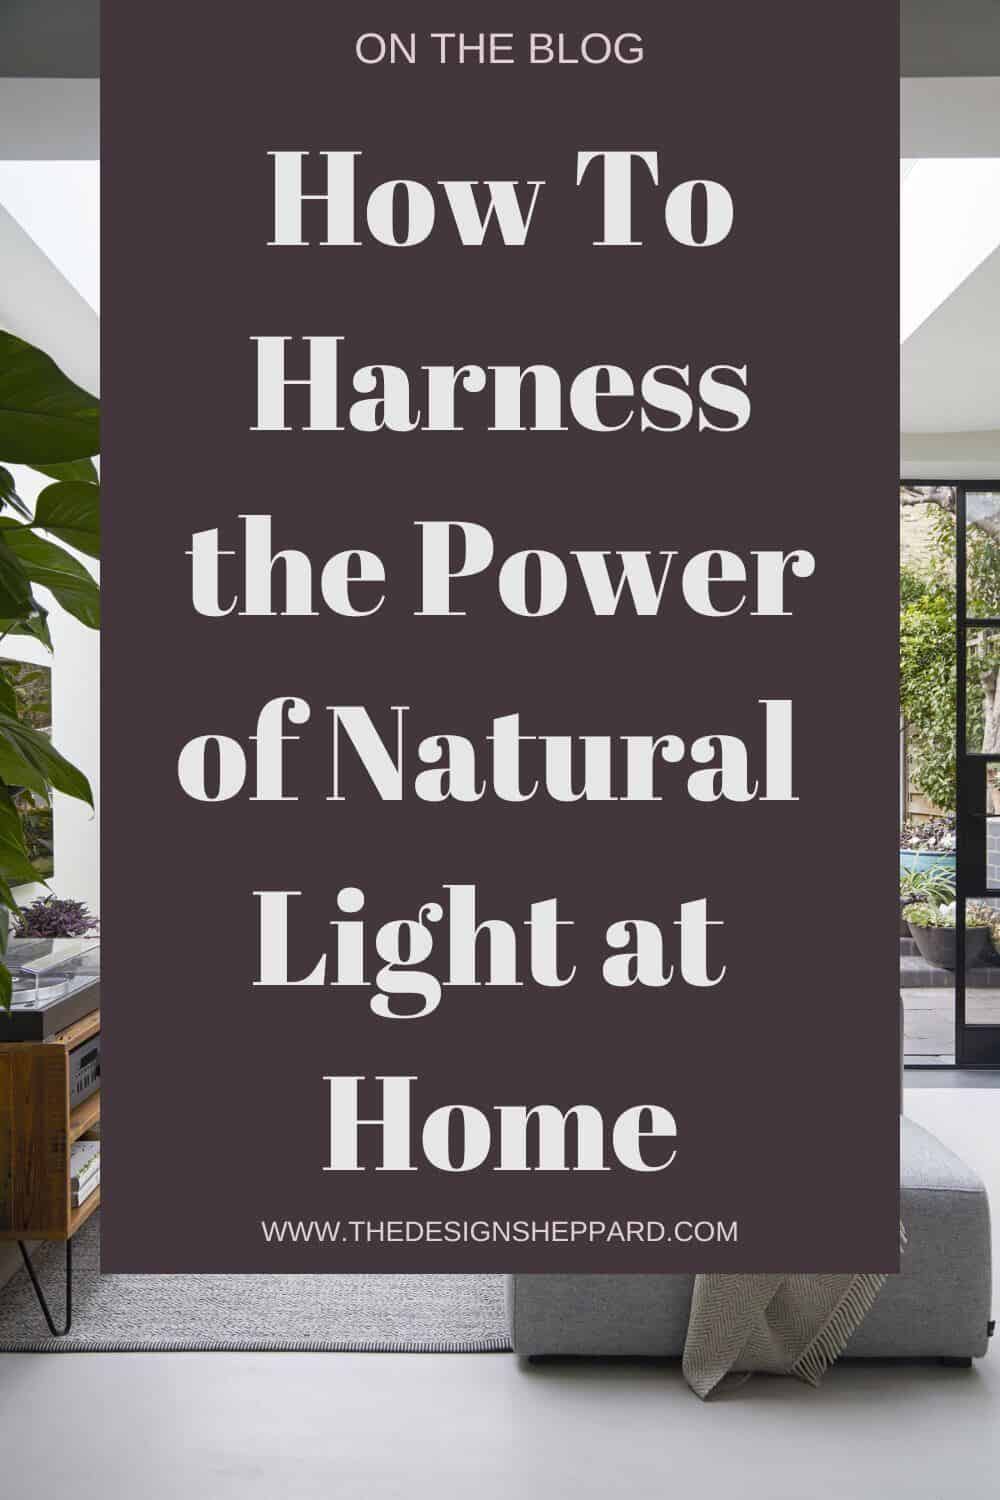 Pinterest Pin. How to harness the power of natural light at home